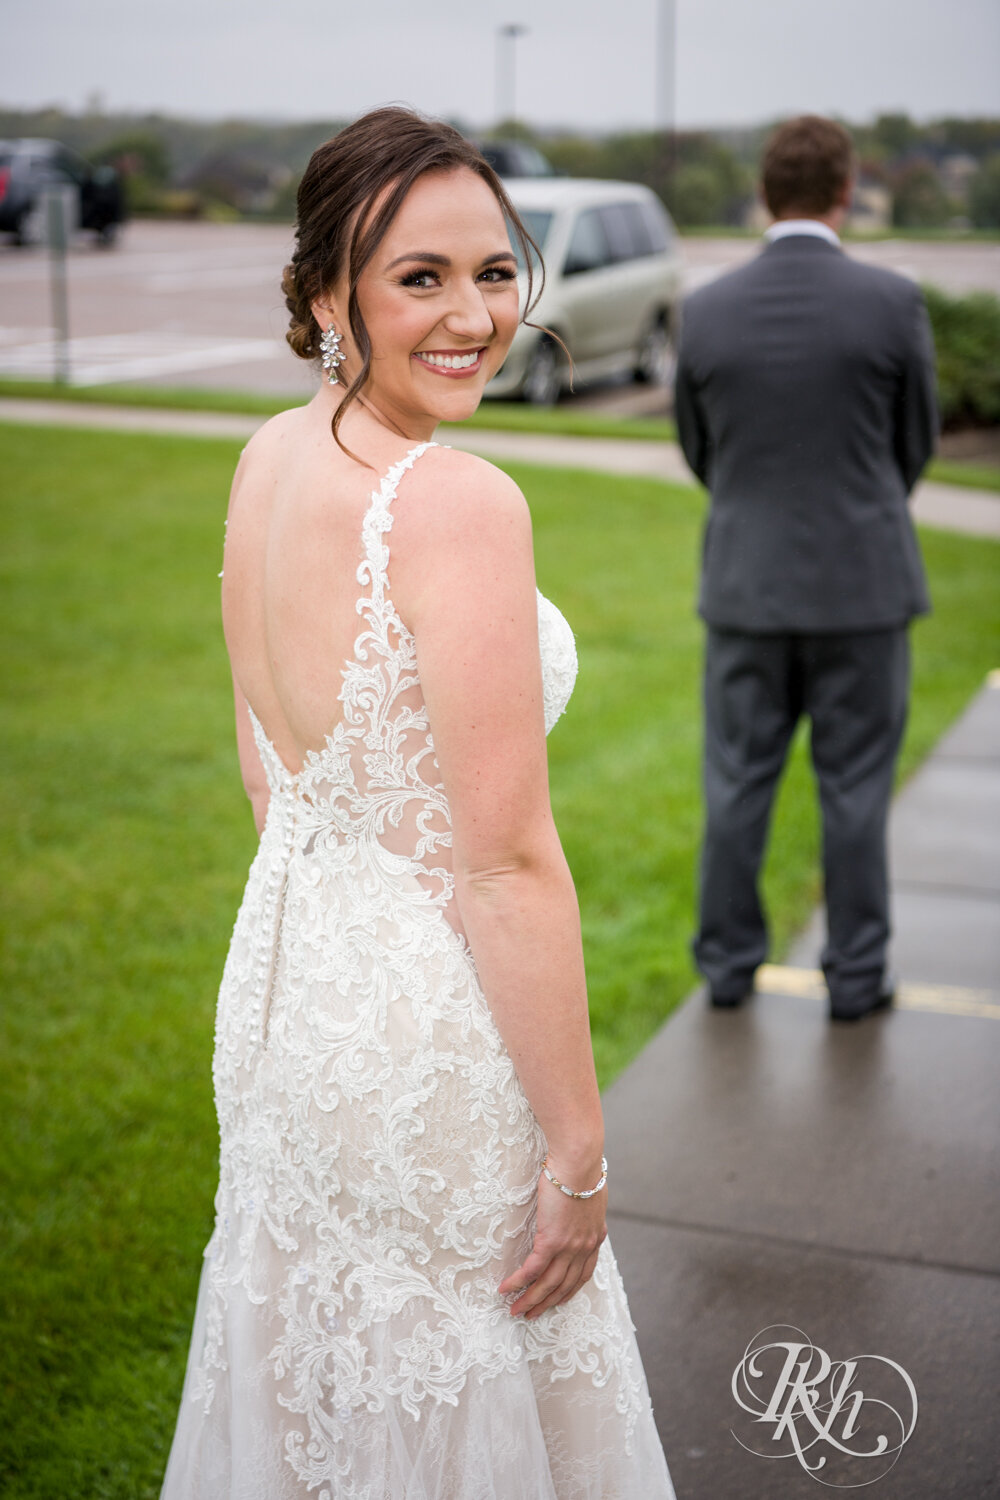 Bride and groom share first look on rainy day at The Wilds Golf Club in Prior Lake, Minnesota.